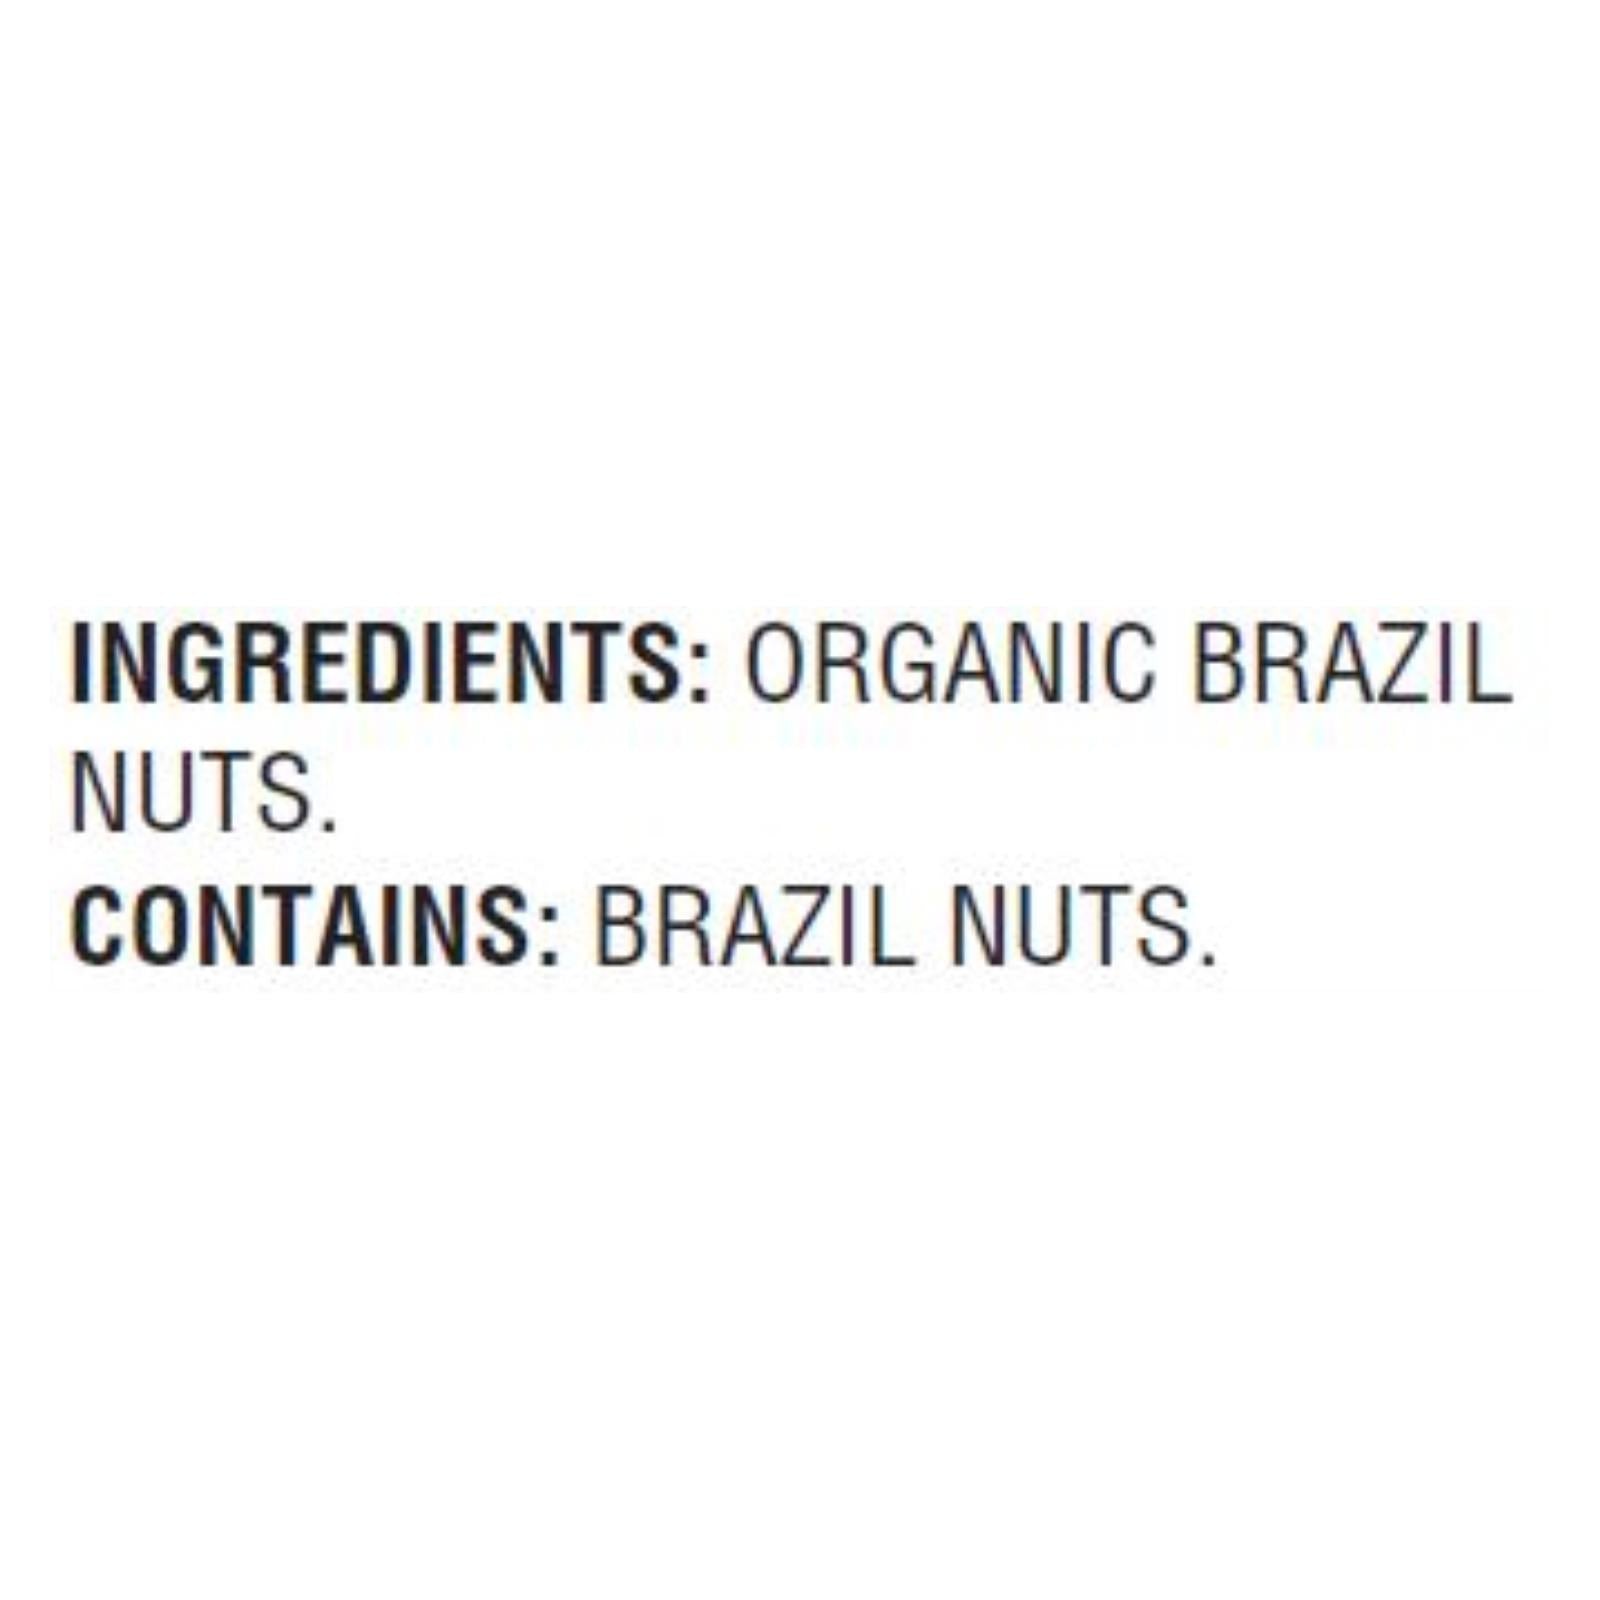 Woodstock Organic Brazil Nuts - Case Of 8 - 8.5 Oz | OnlyNaturals.us